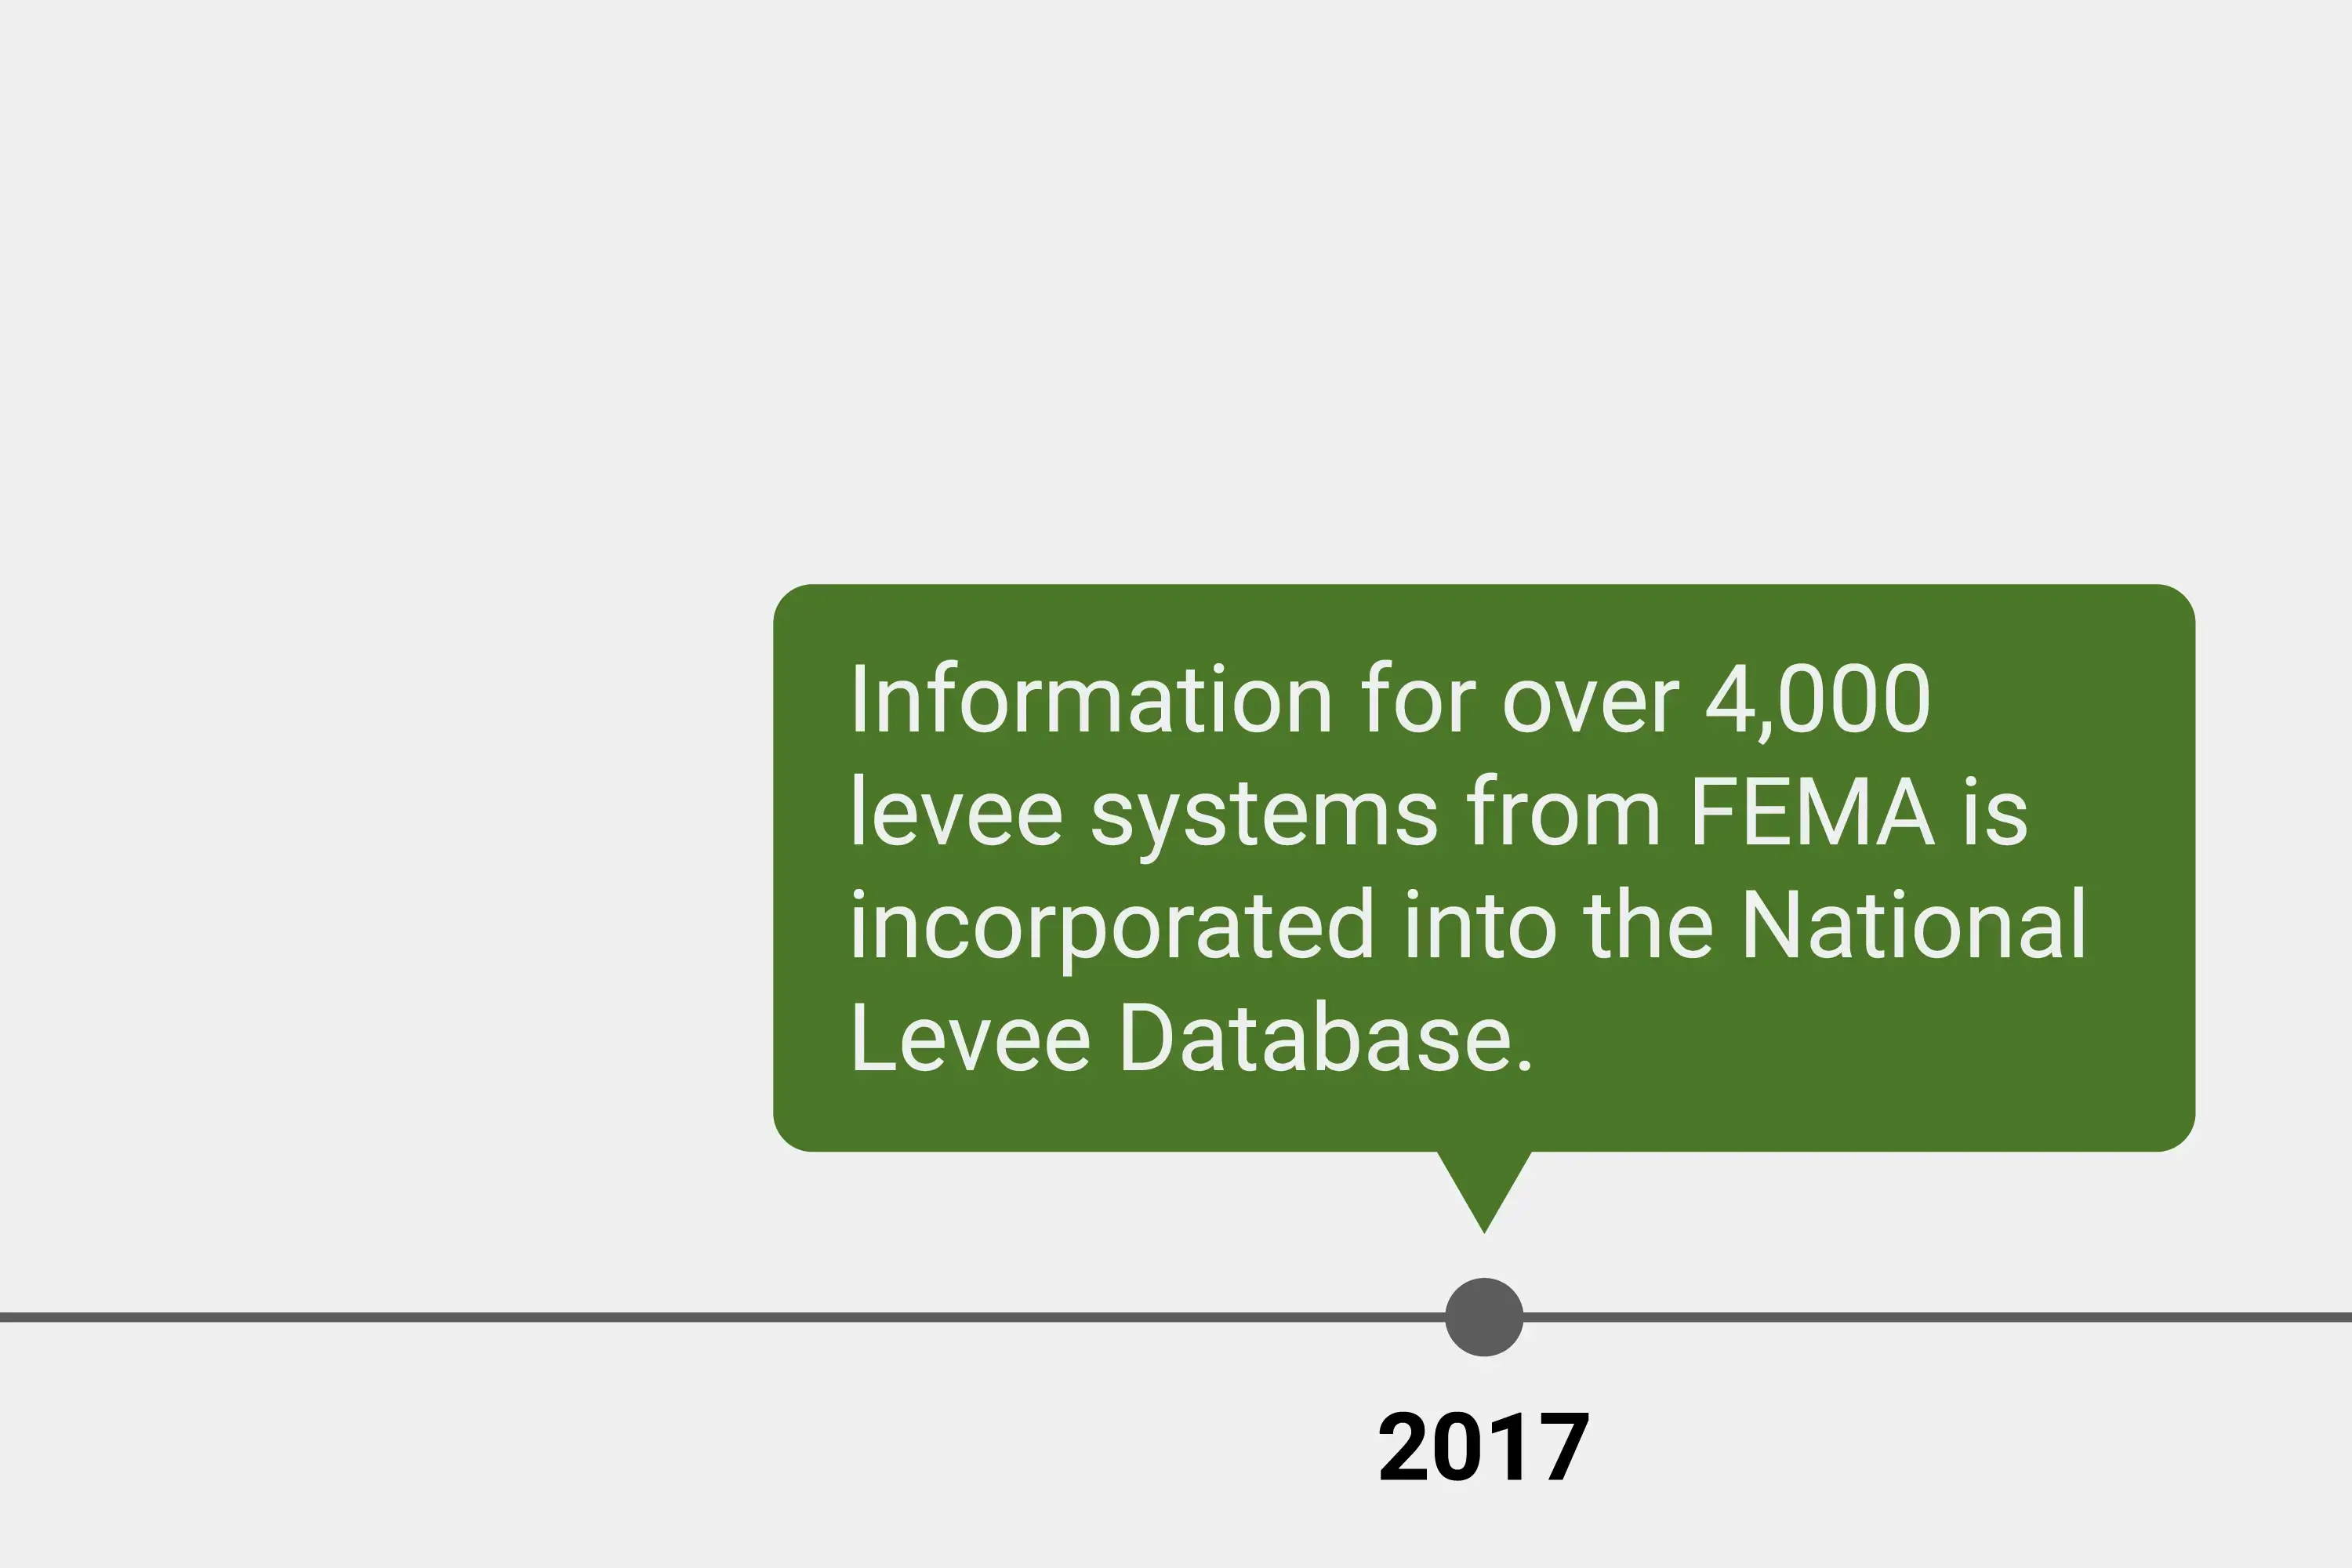 History of National Levee Database up to 2017.